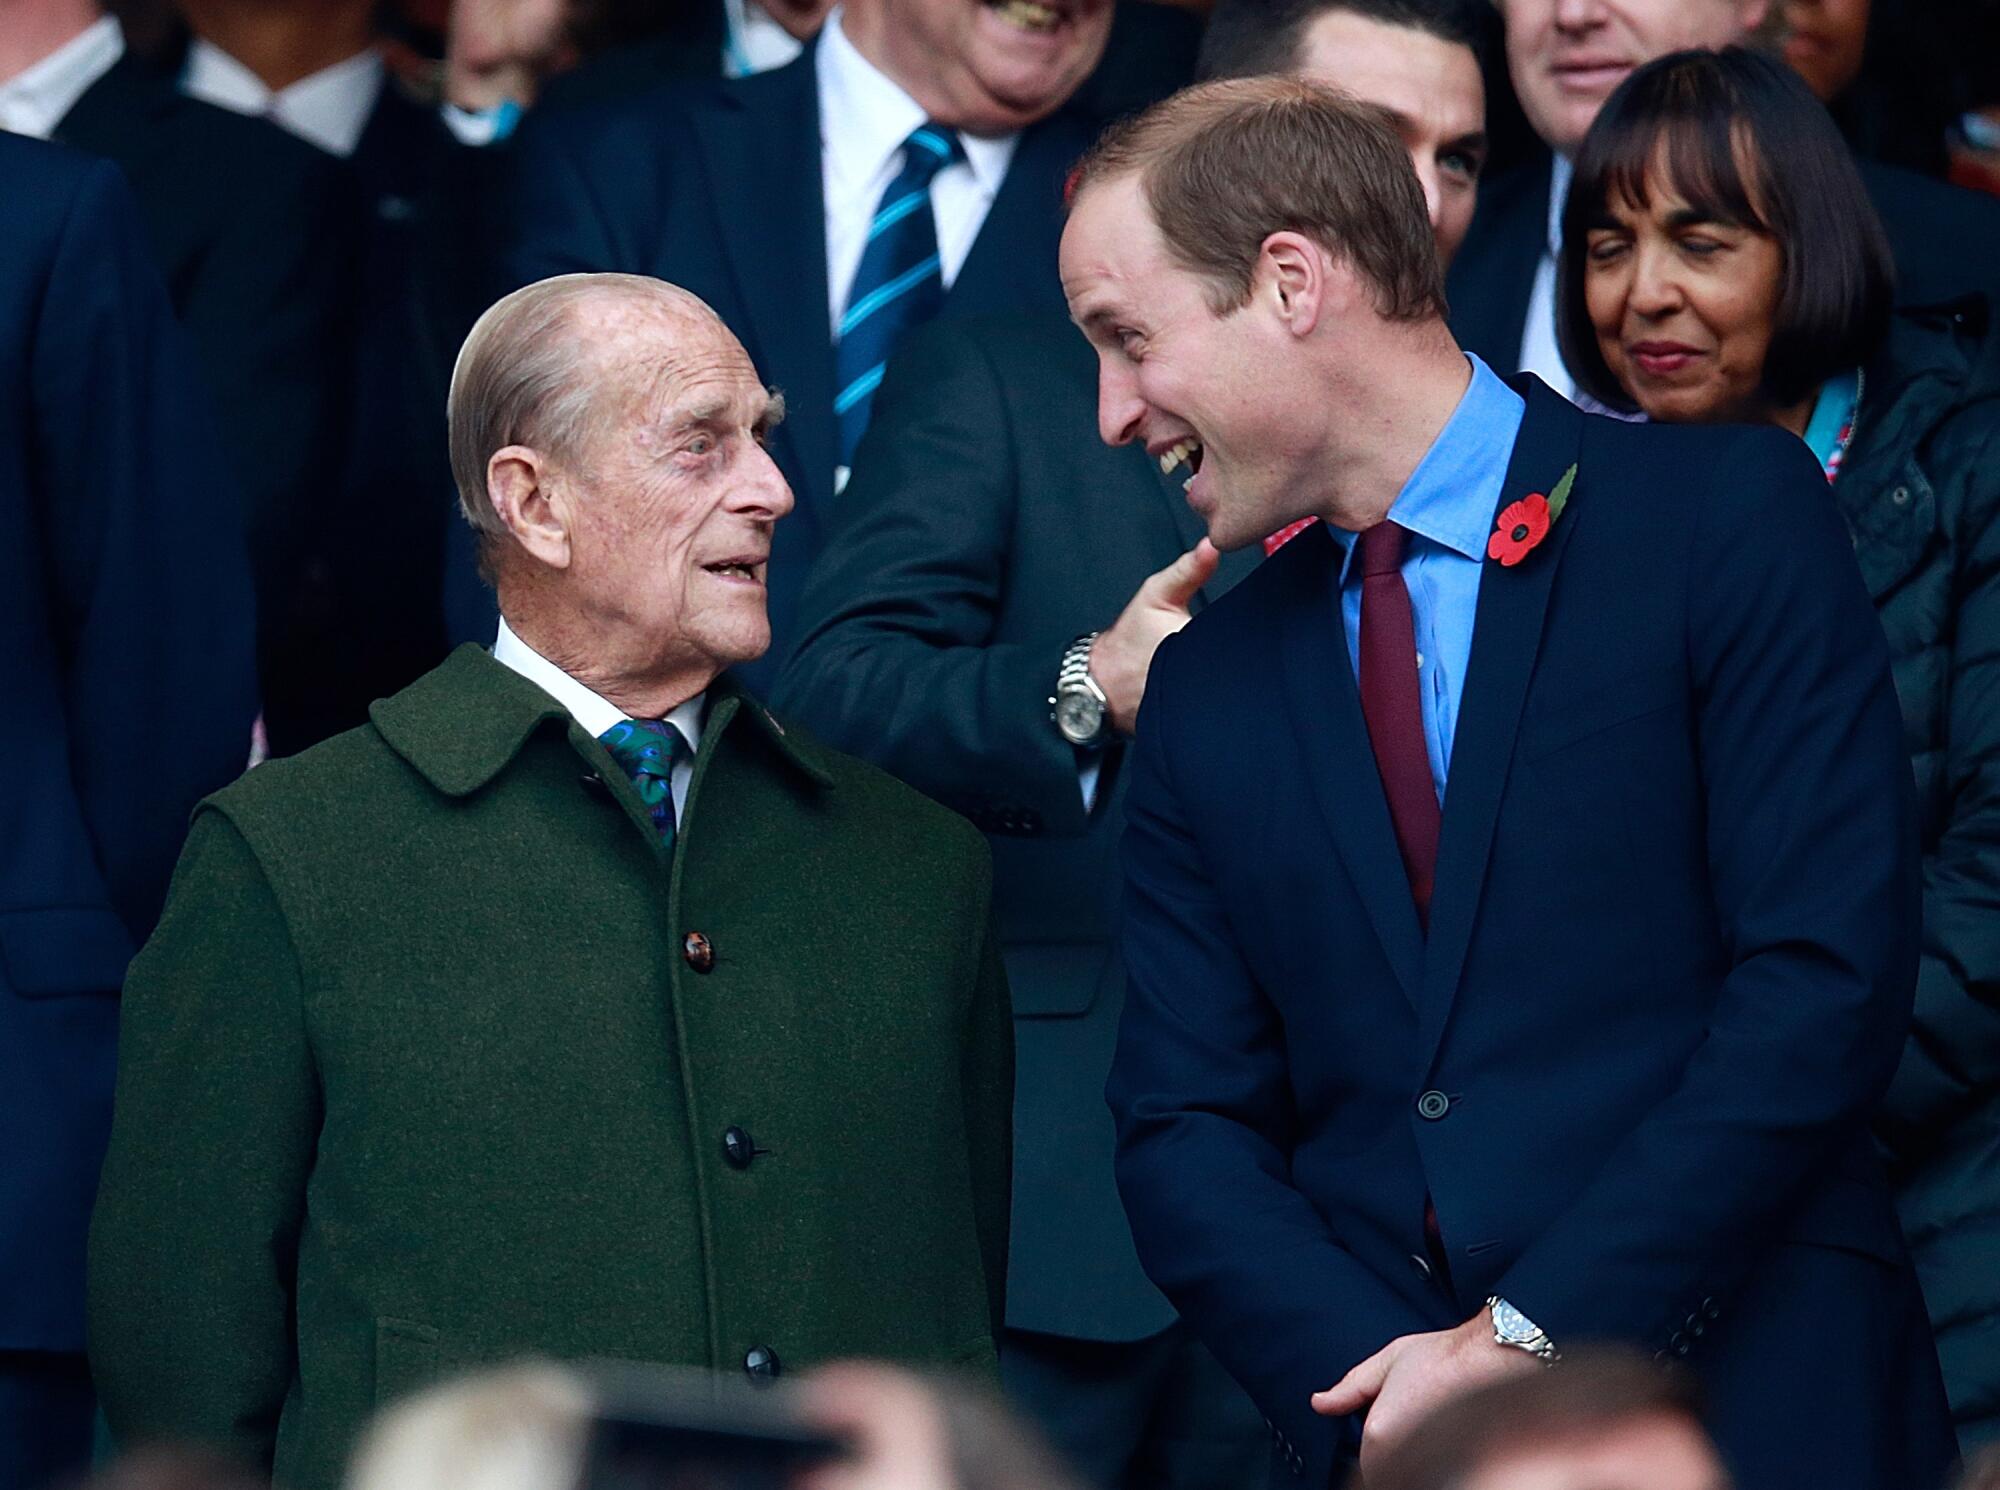 Prince Philip smiles and Prince William laughs at an outdoor event.